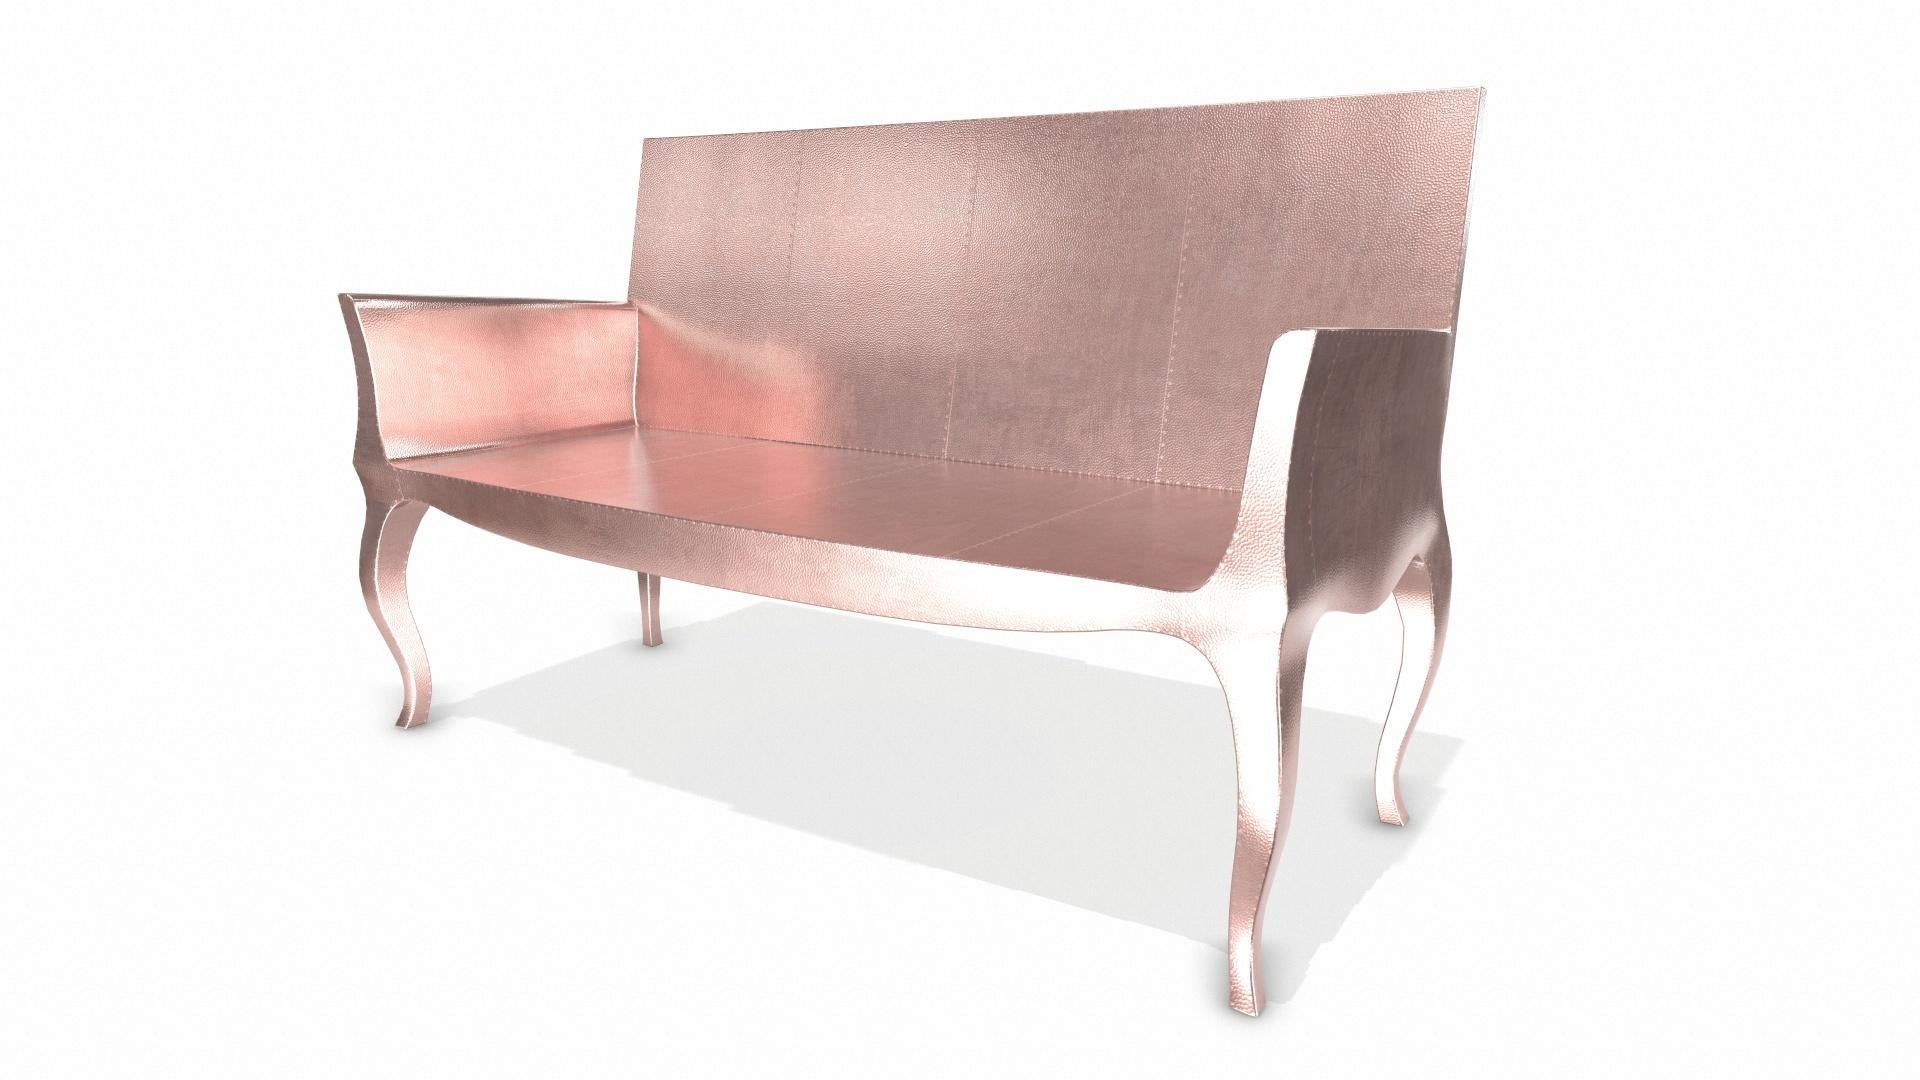 American Louise Settee Art Deco Daybeds in Mid. Hammered Copper by Paul Mathieu For Sale